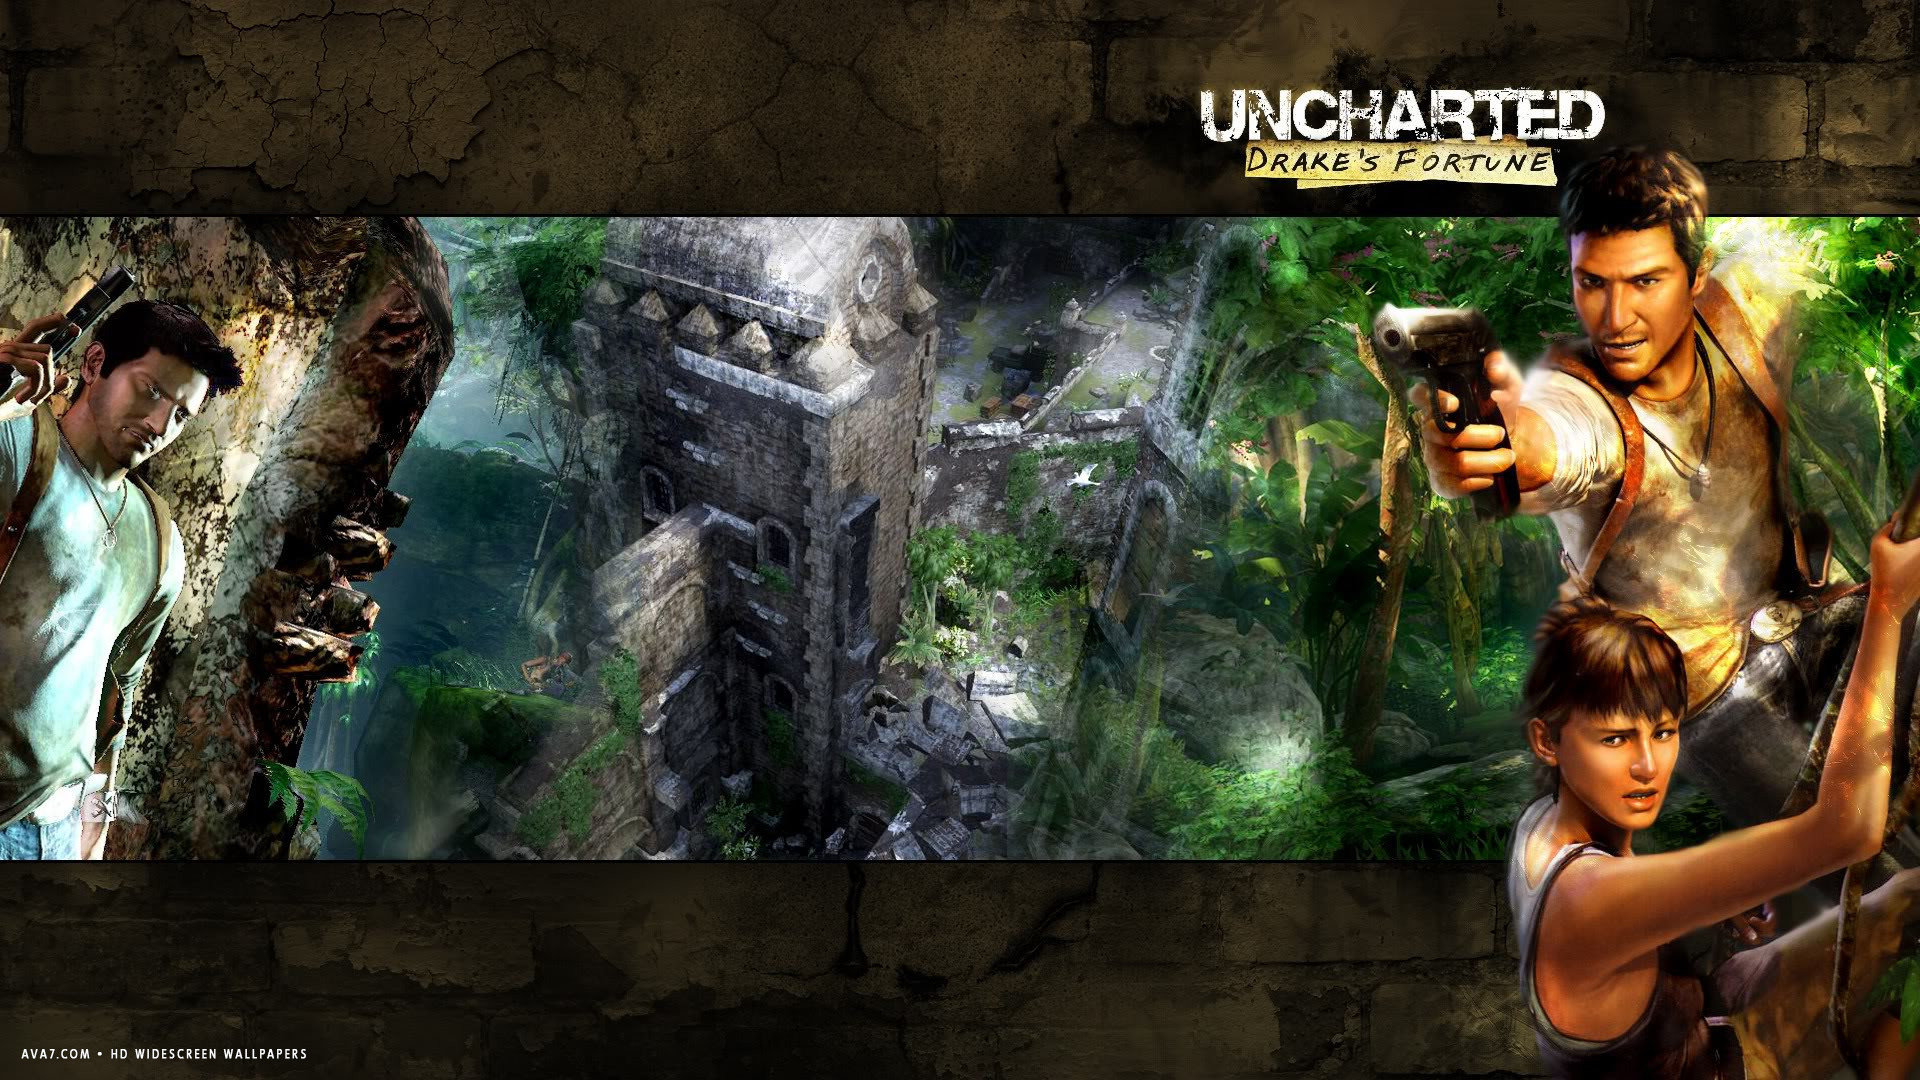 Uncharted Drakes Fortune Game Hd Widescreen Wallpaper - Uncharted Drake's Fortune - HD Wallpaper 